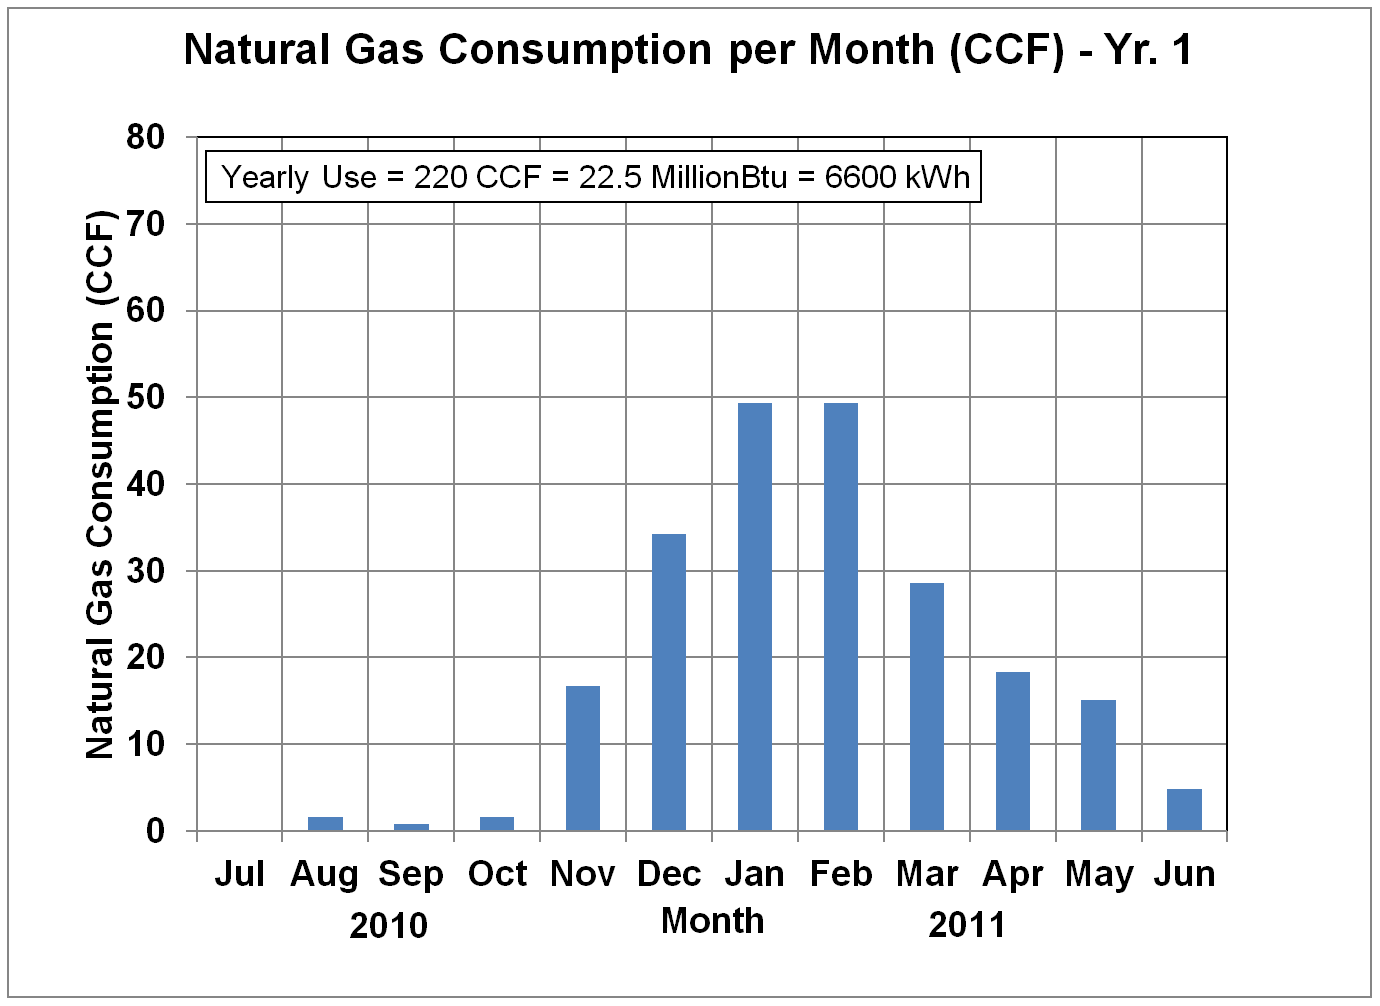 Natural Gas Usage in CCF - Yr. 1